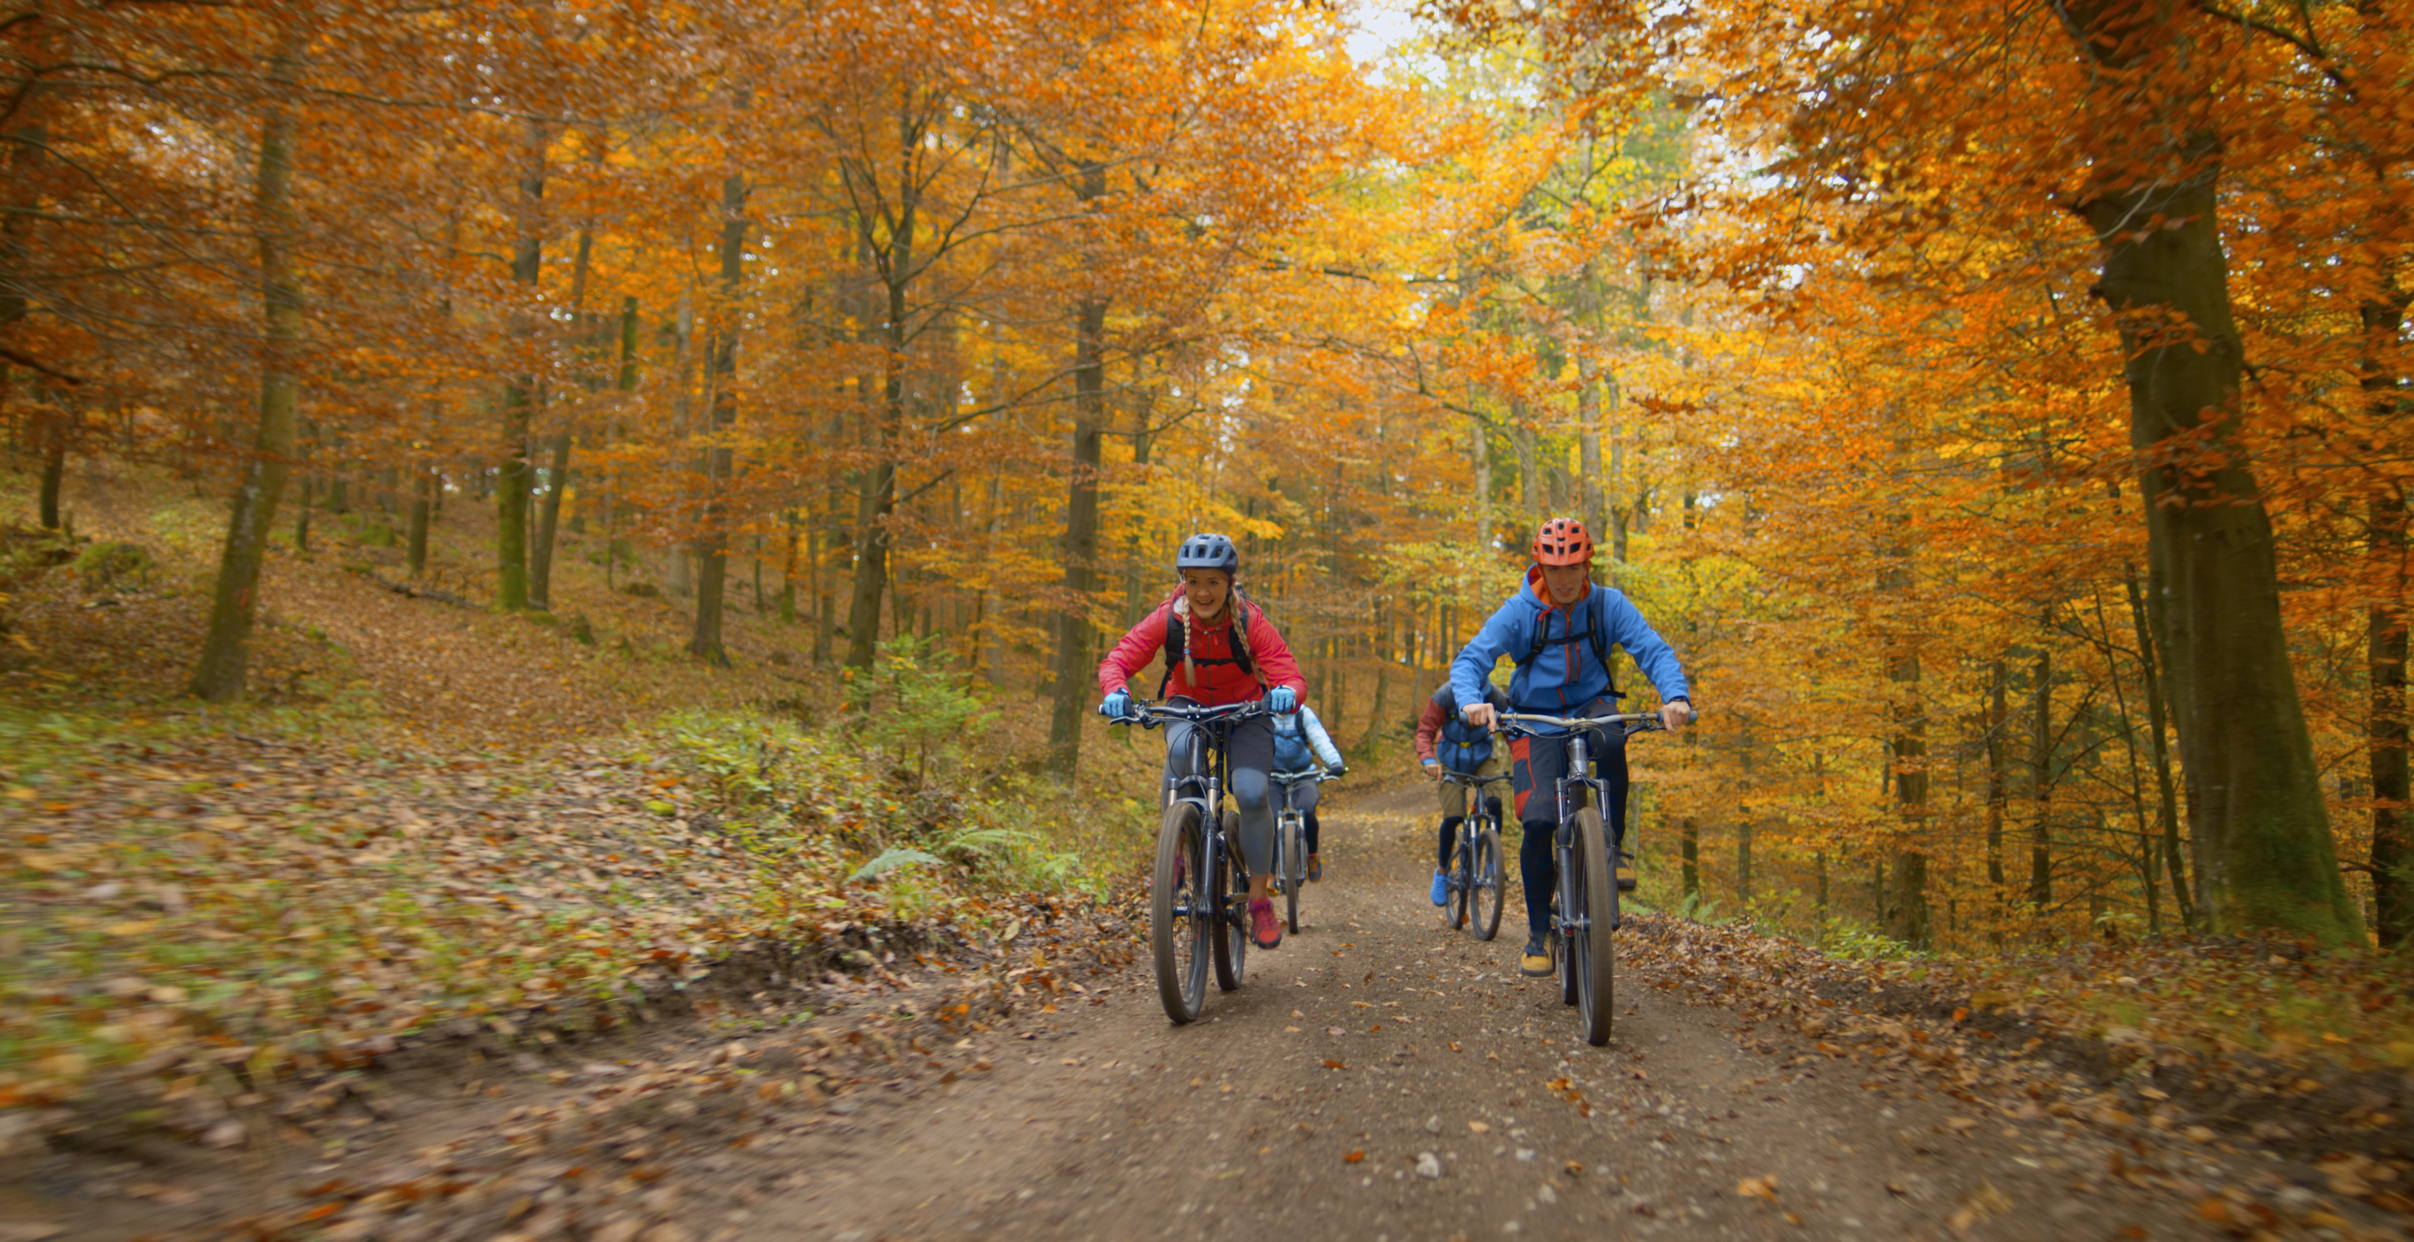 How to Dress for Your Fall Ride